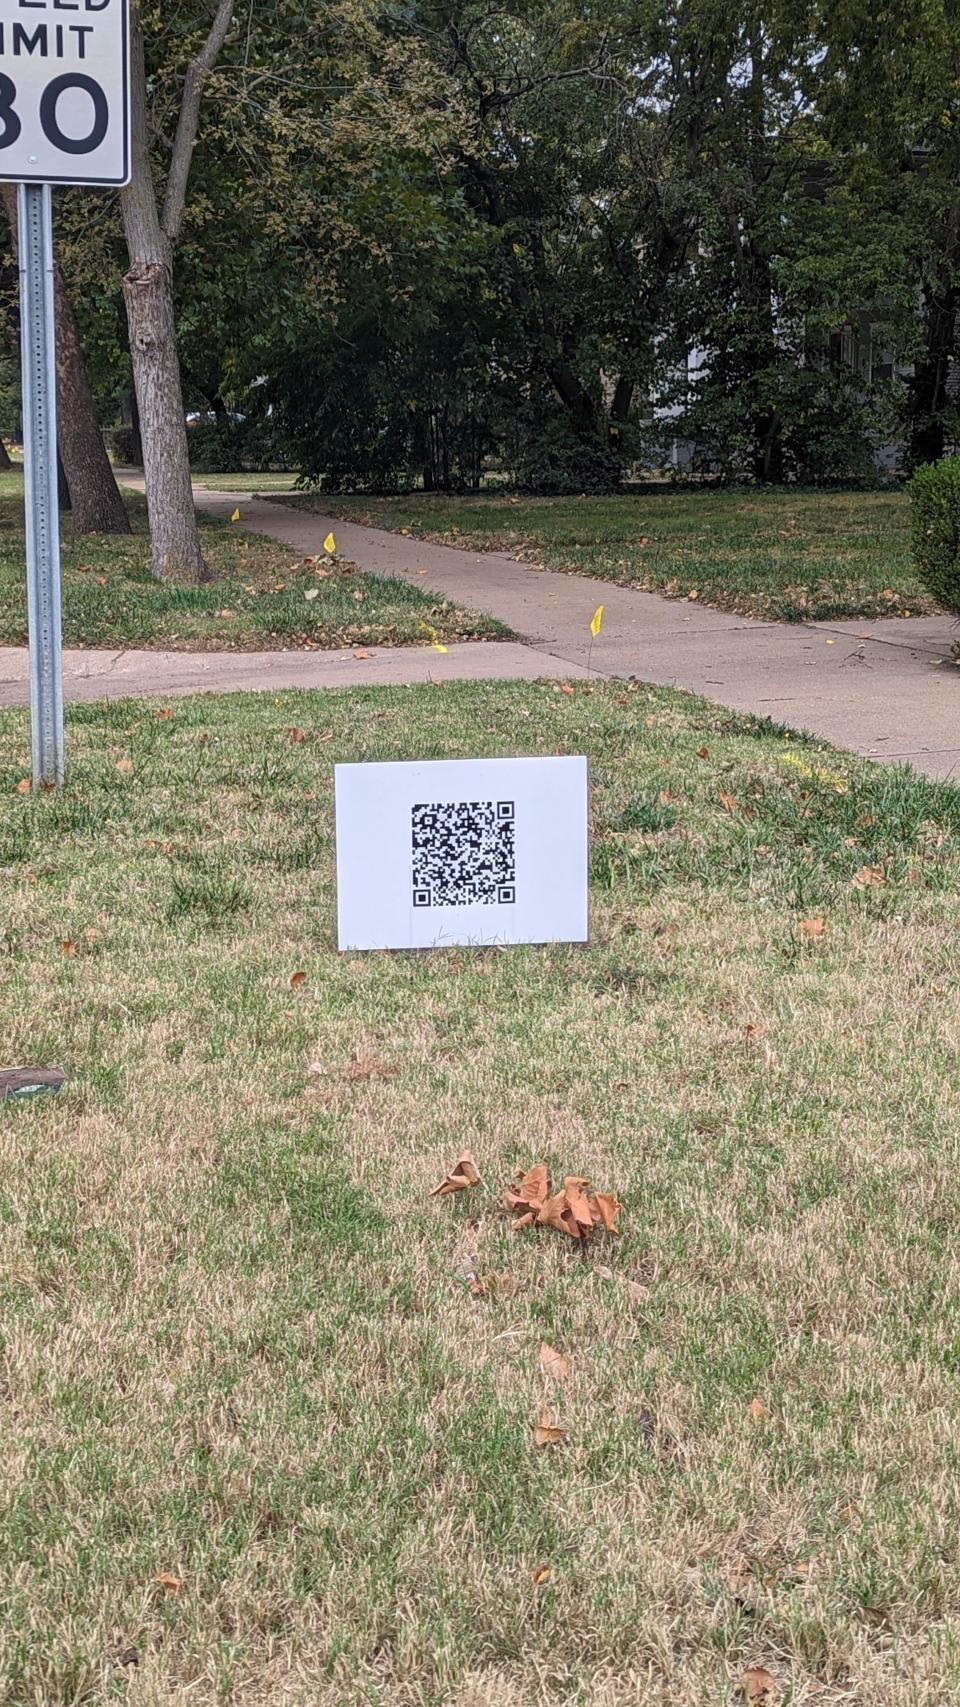 Signs that feature a QR code, instead of the traditional candidate's name, are popping up in yards around Salina this election cycle. When scanned by a phone's camera, this sign leads to a survey paid by one of the Salina City Commission candidates.